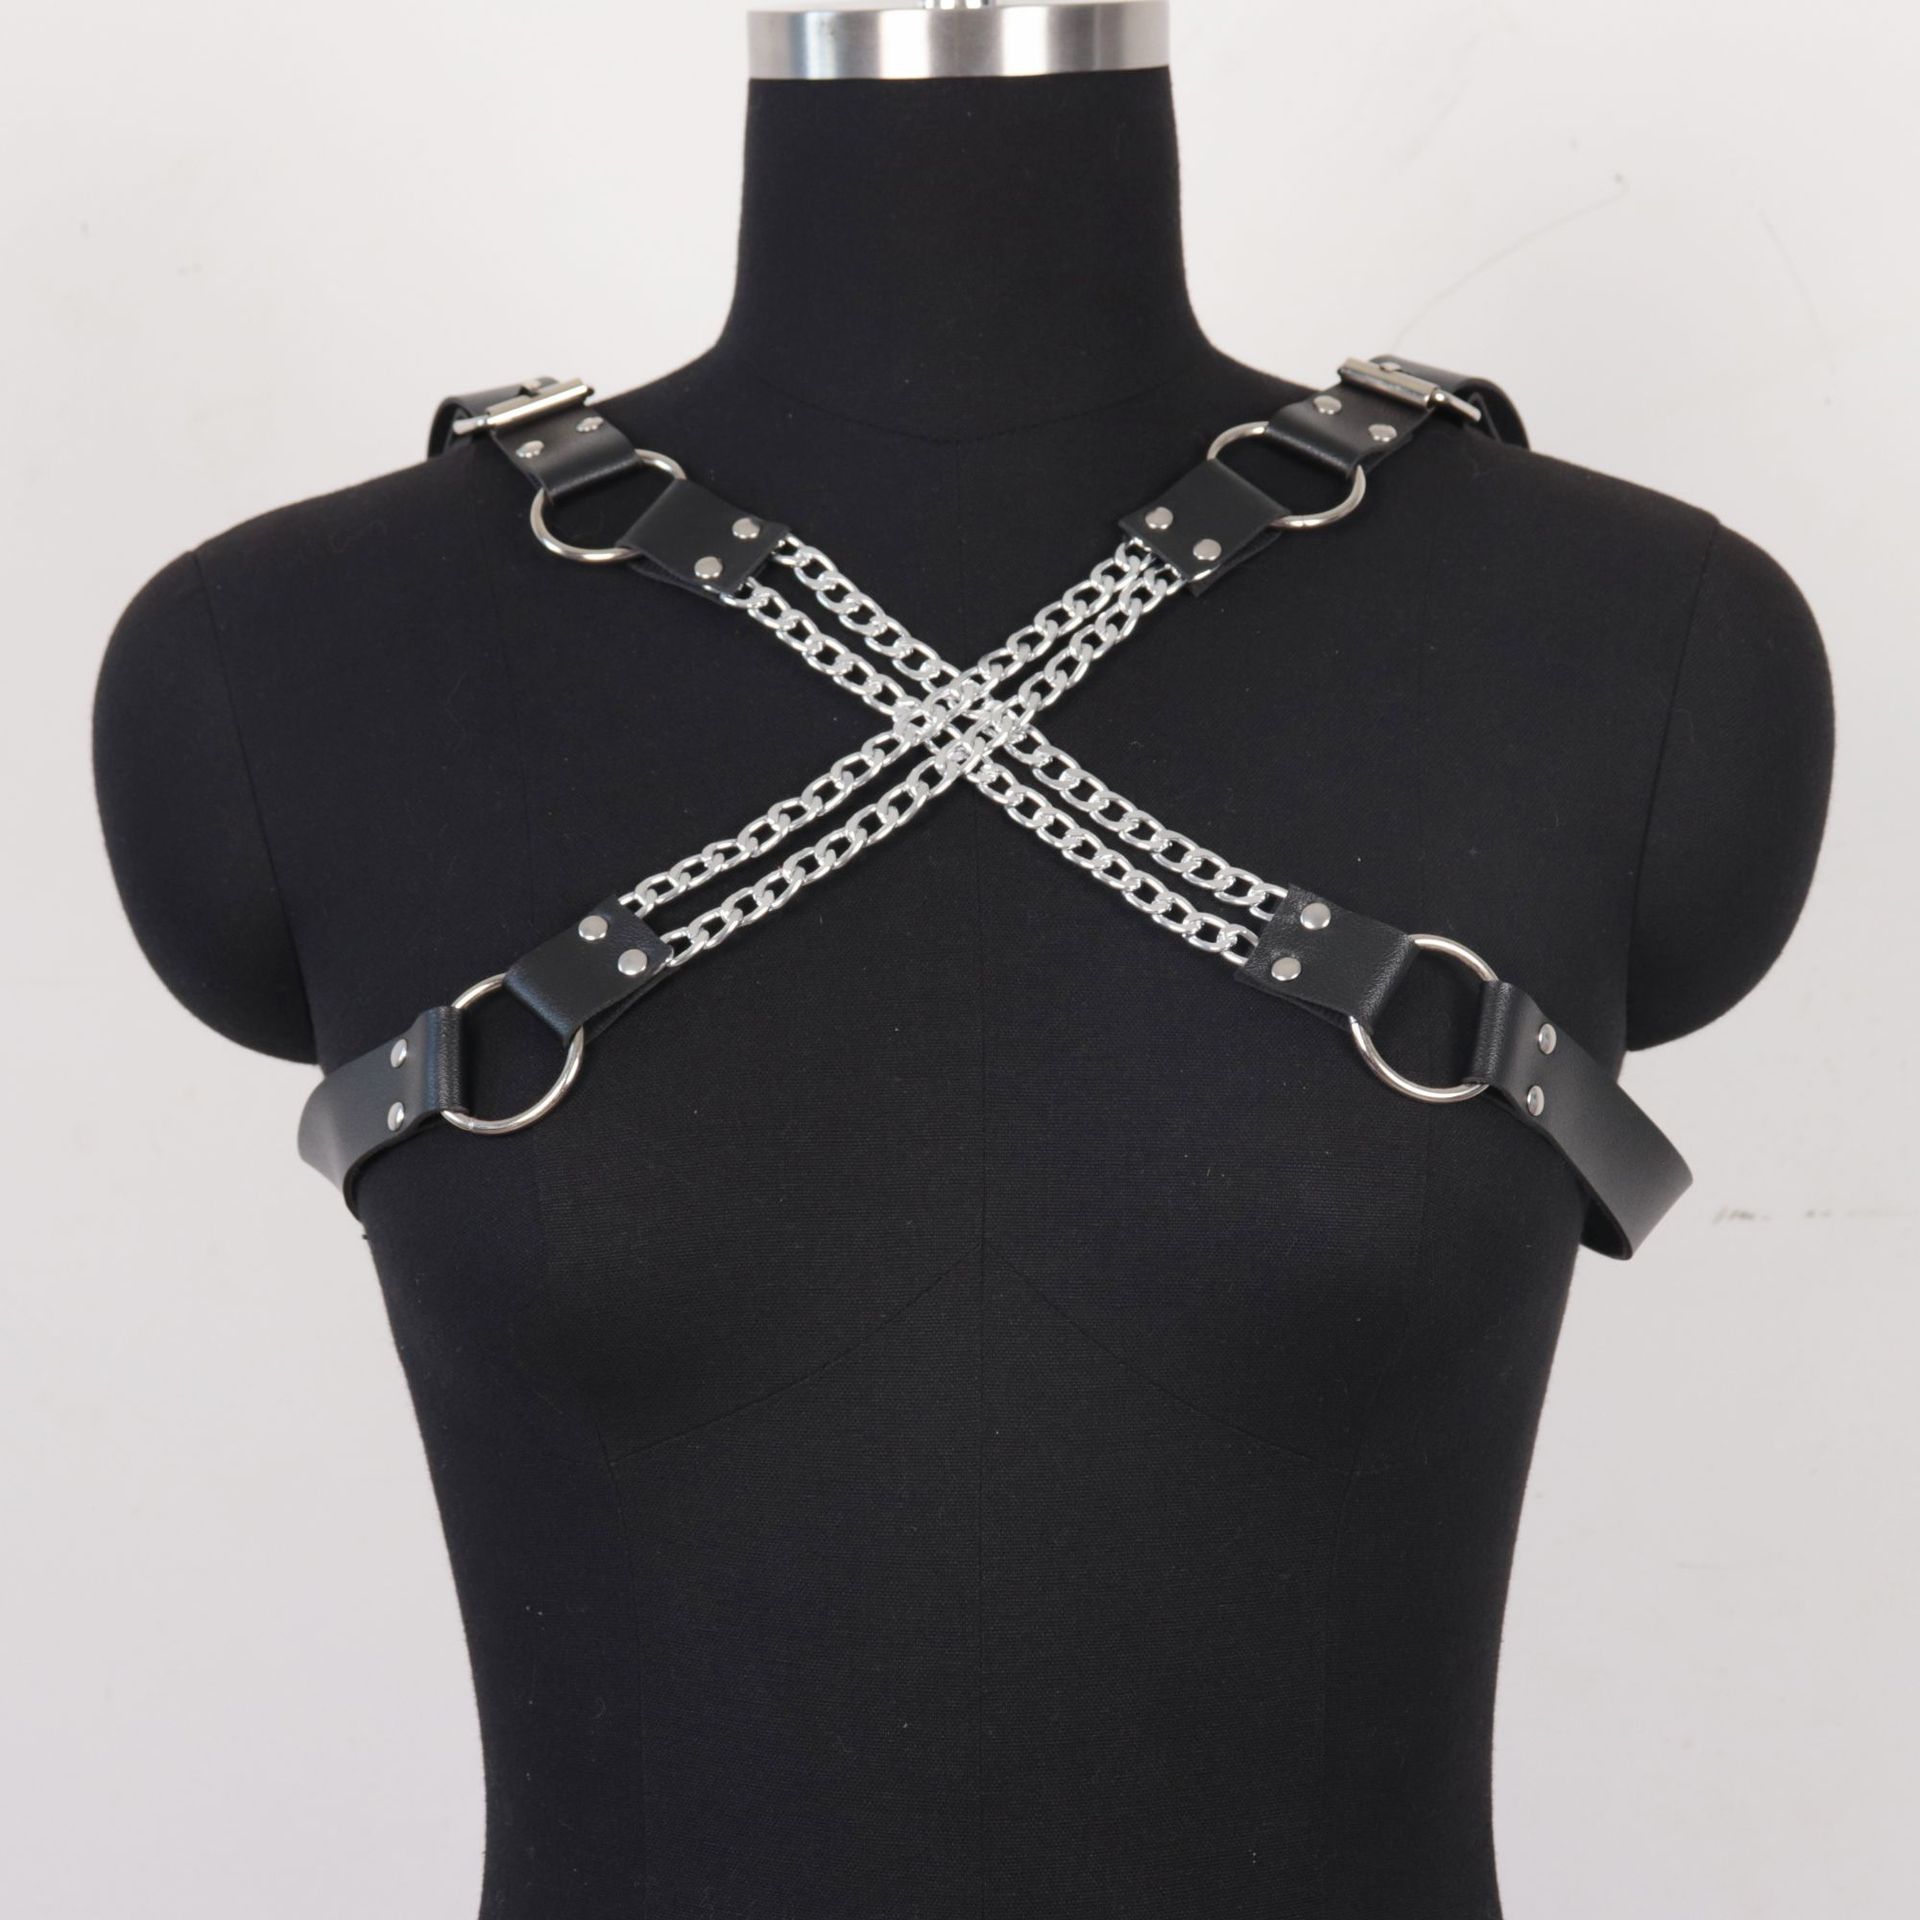 Men's Sexy Body Chains SM Bondage and Discipline Leather Chain Strap Sex Aid in Stock Wholesale